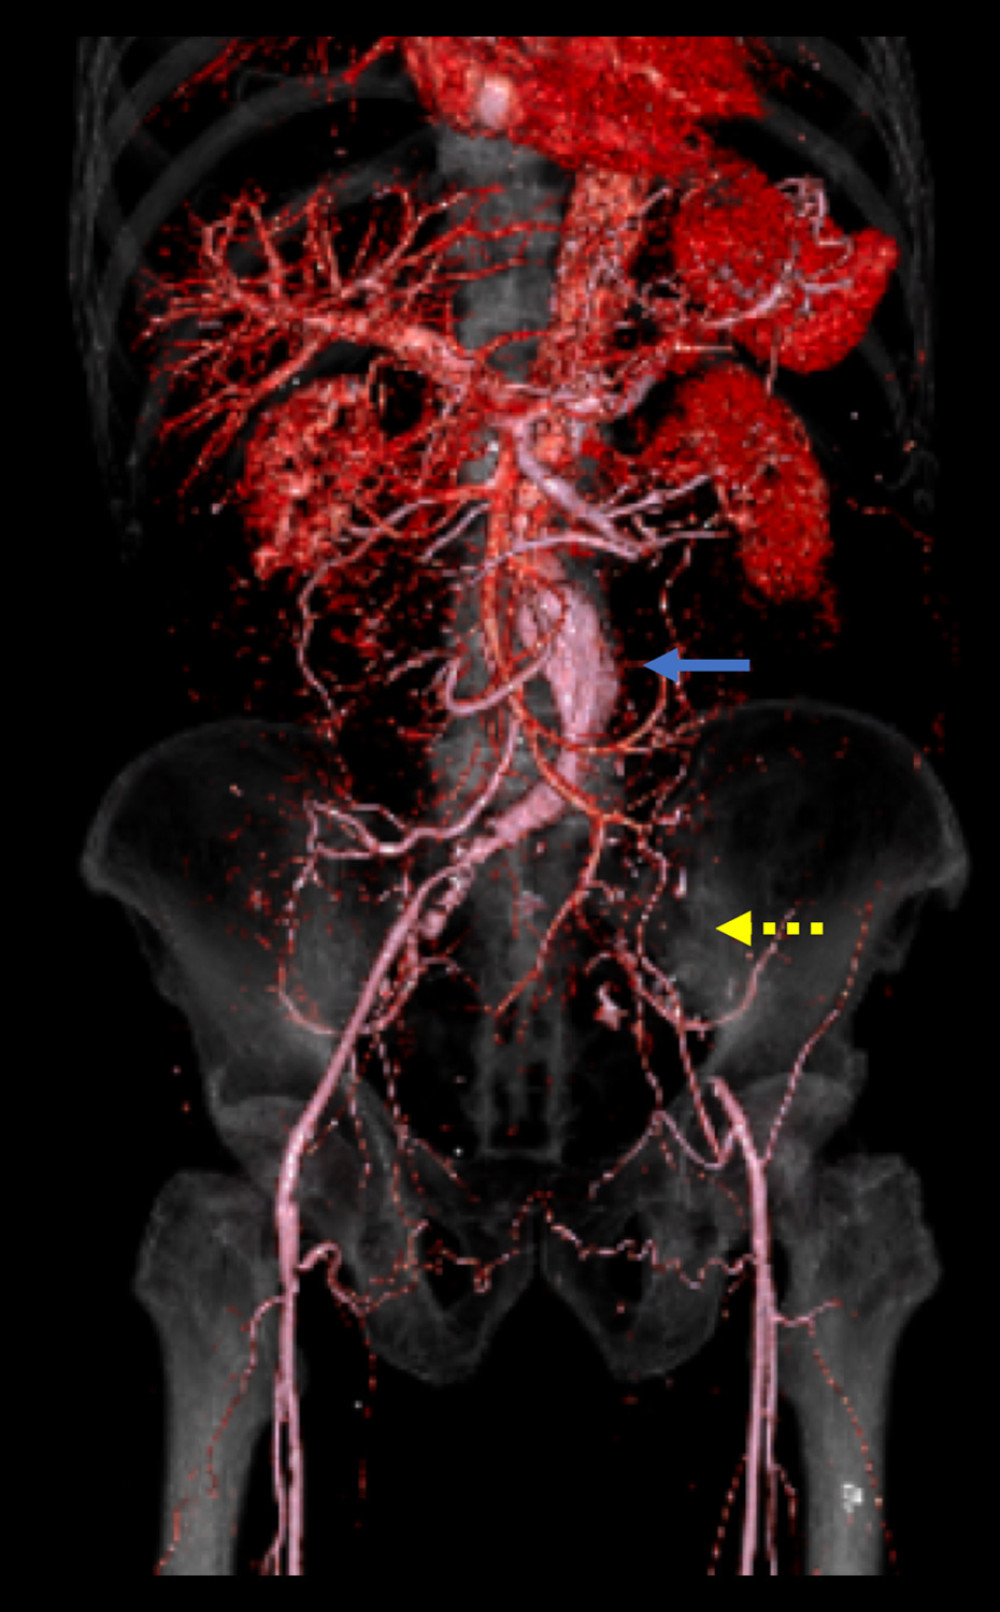 Preoperative computed tomography angiography images. An abdominal aortic aneurysm (solid arrow) and left iliac artery occlusion (dashed arrow) are seen.